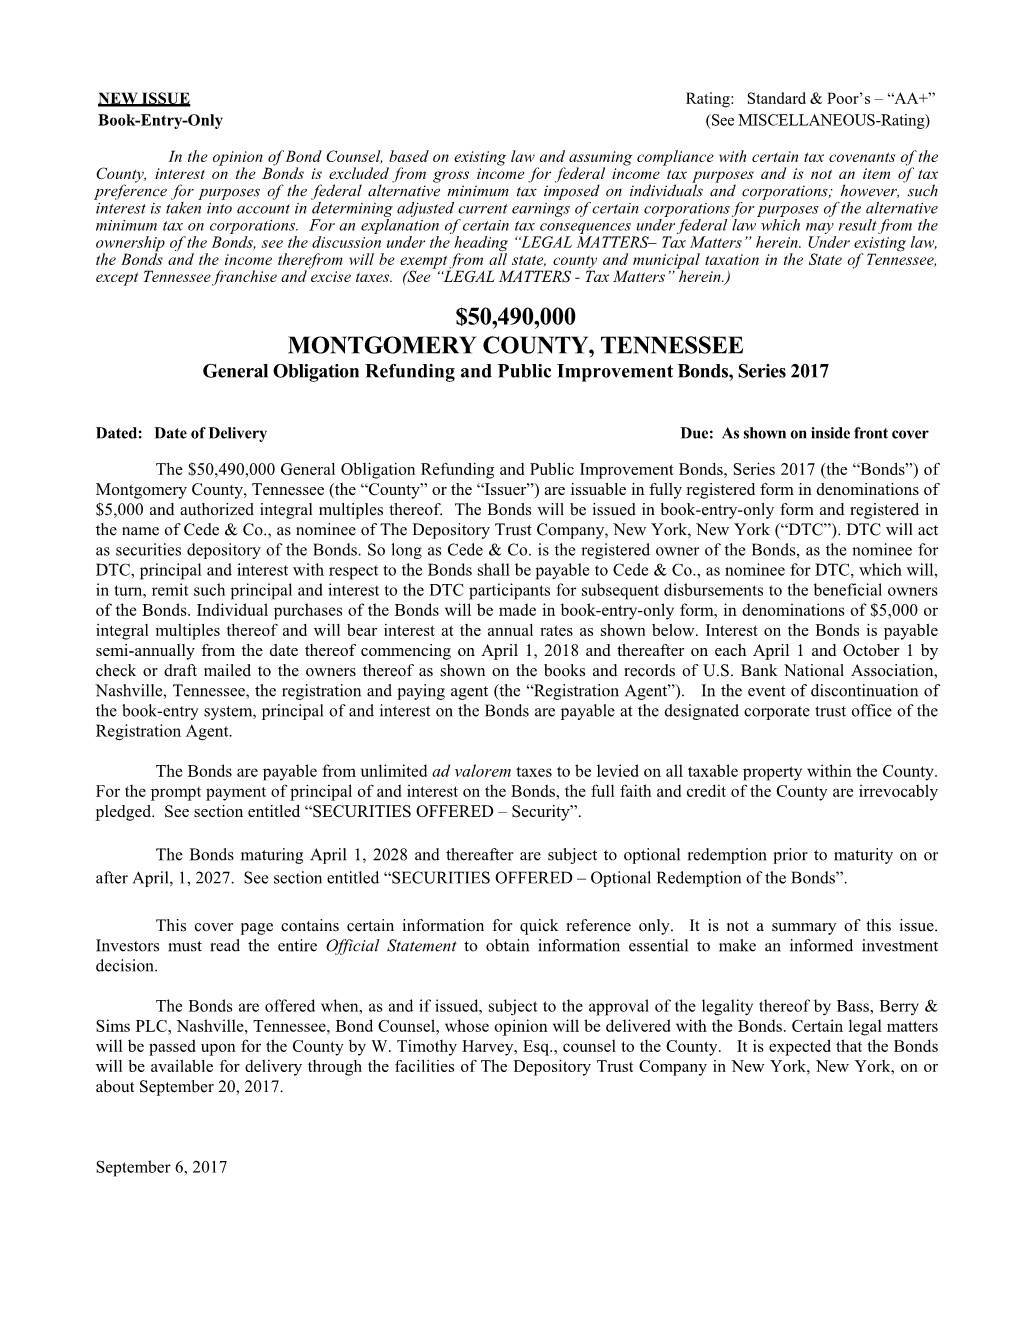 $50,490,000 MONTGOMERY COUNTY, TENNESSEE General Obligation Refunding and Public Improvement Bonds, Series 2017